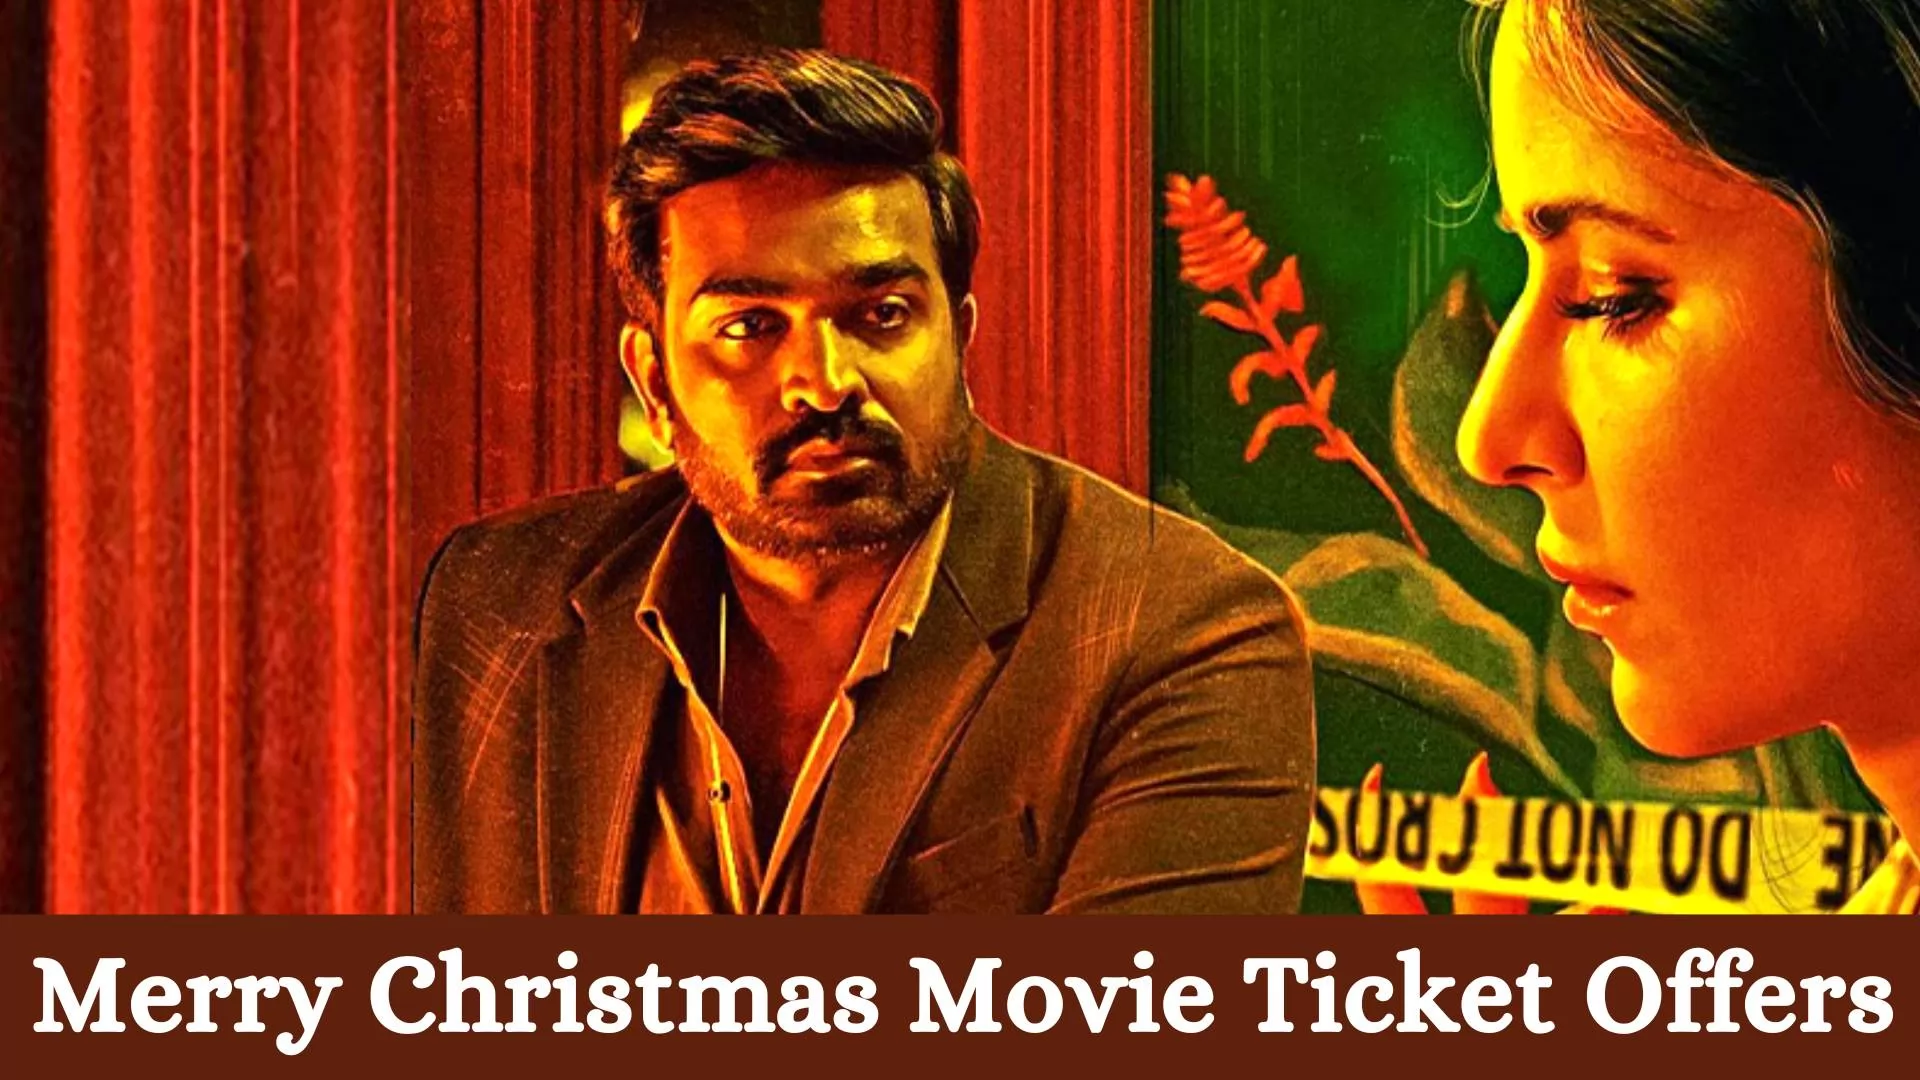 Merry Christmas Movie Ticket Offers